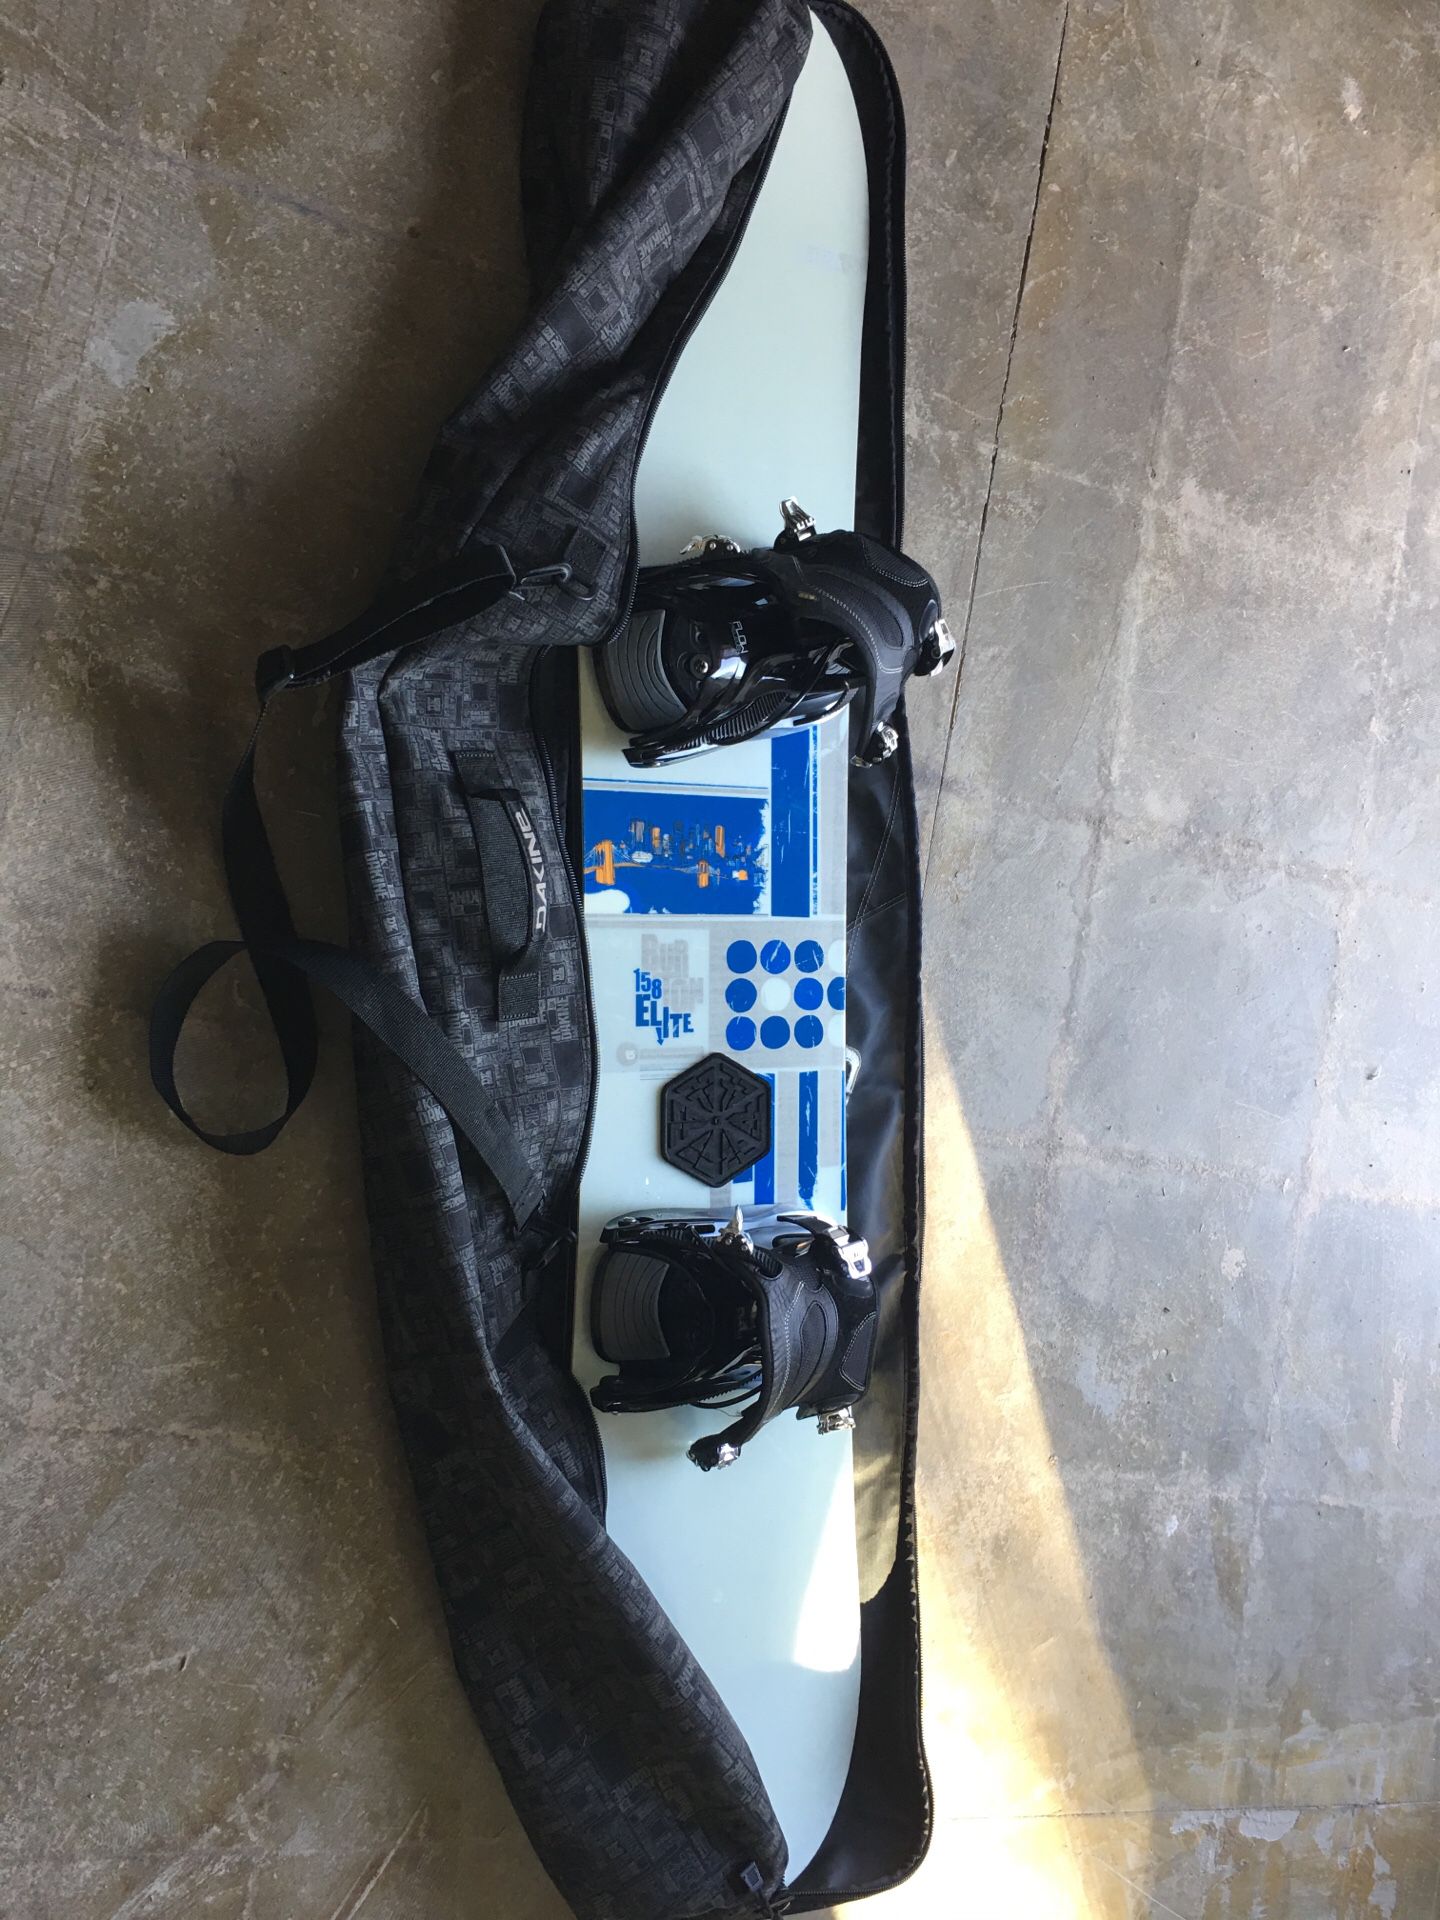 Snowboard with flow bindings and bag size 11 Burton Boots and bag